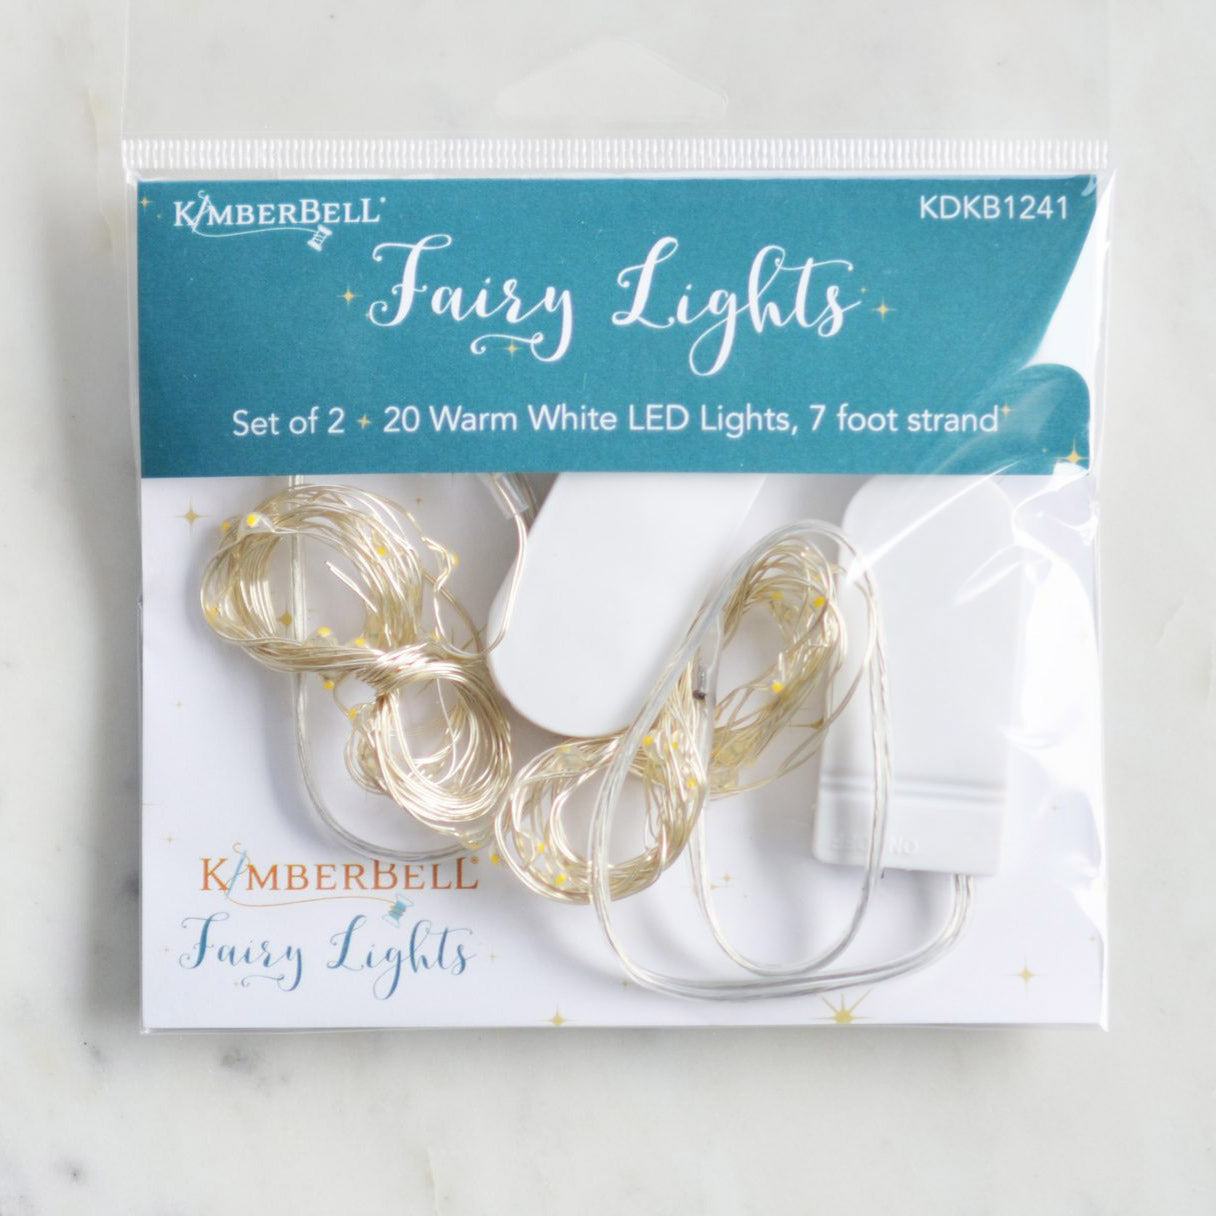 Kimberbell Fairy Lights add a soft glow to projects. Each package contains 2 seven foot strands with 20 warm white LED lights on each strand. Each strand includes a battery pack with on/off switch.